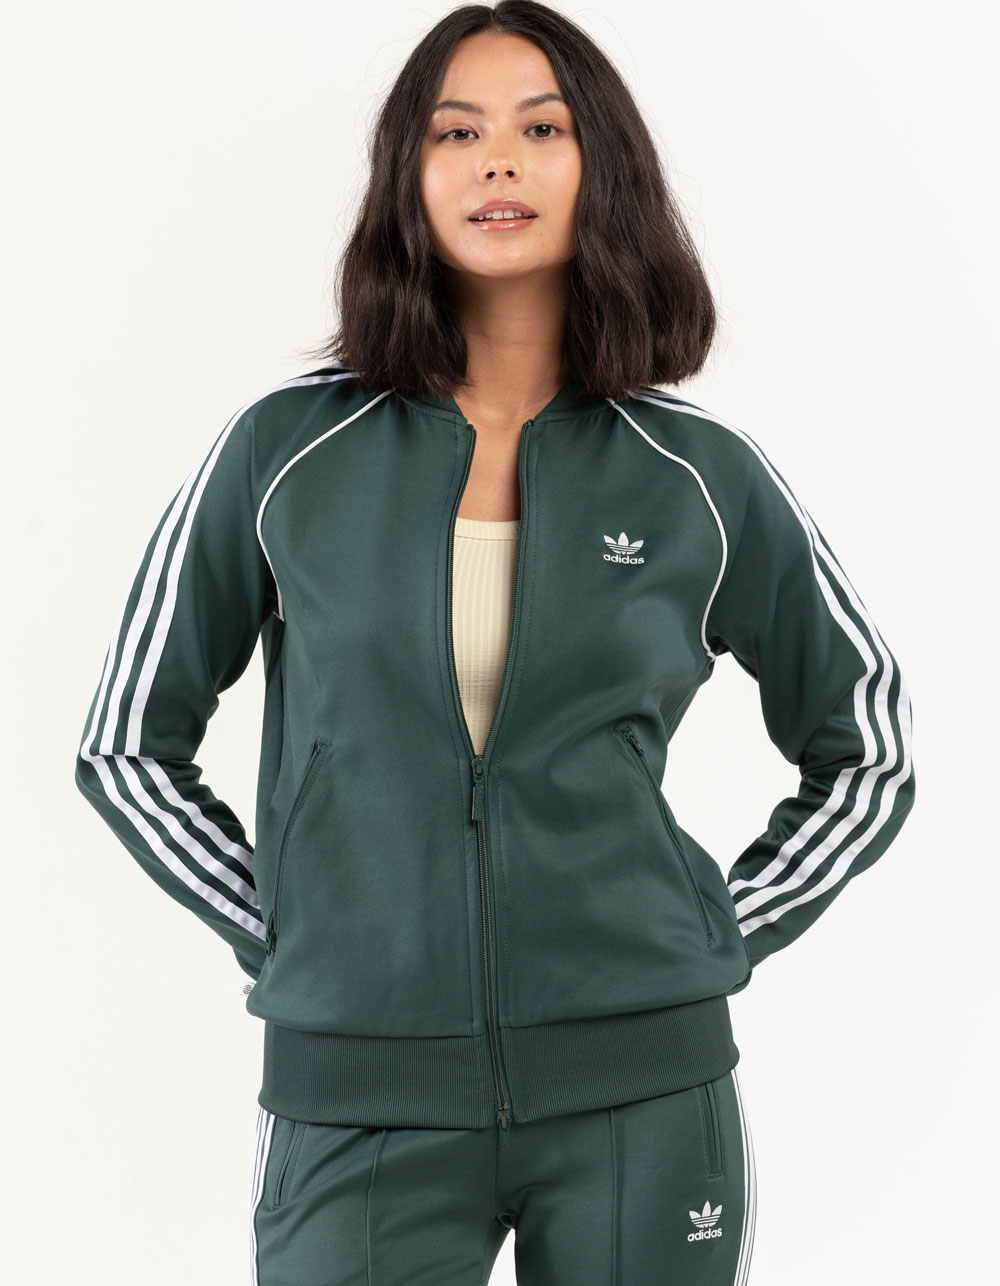 ADIDAS Primeblue SST Womens Track Pants - FOREST